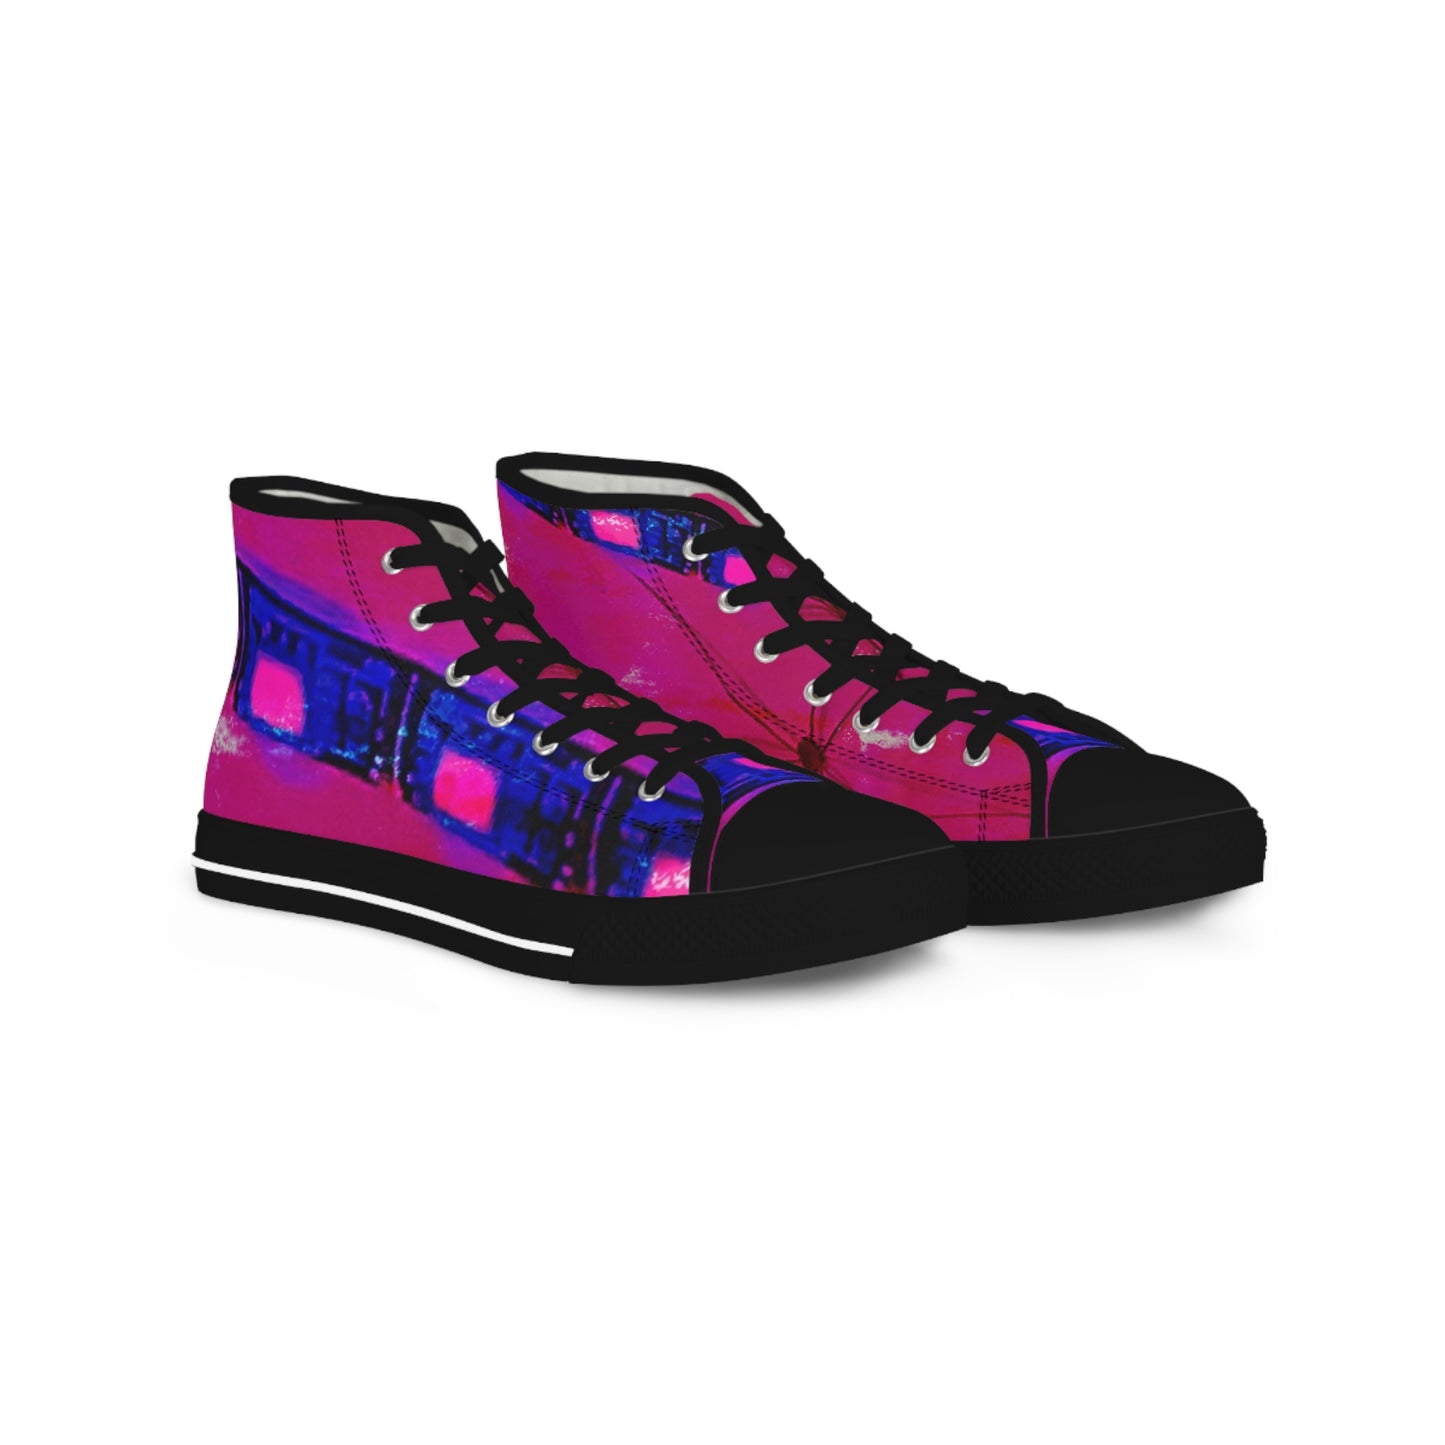 Limited Edition High Top Sneakers - Tamara